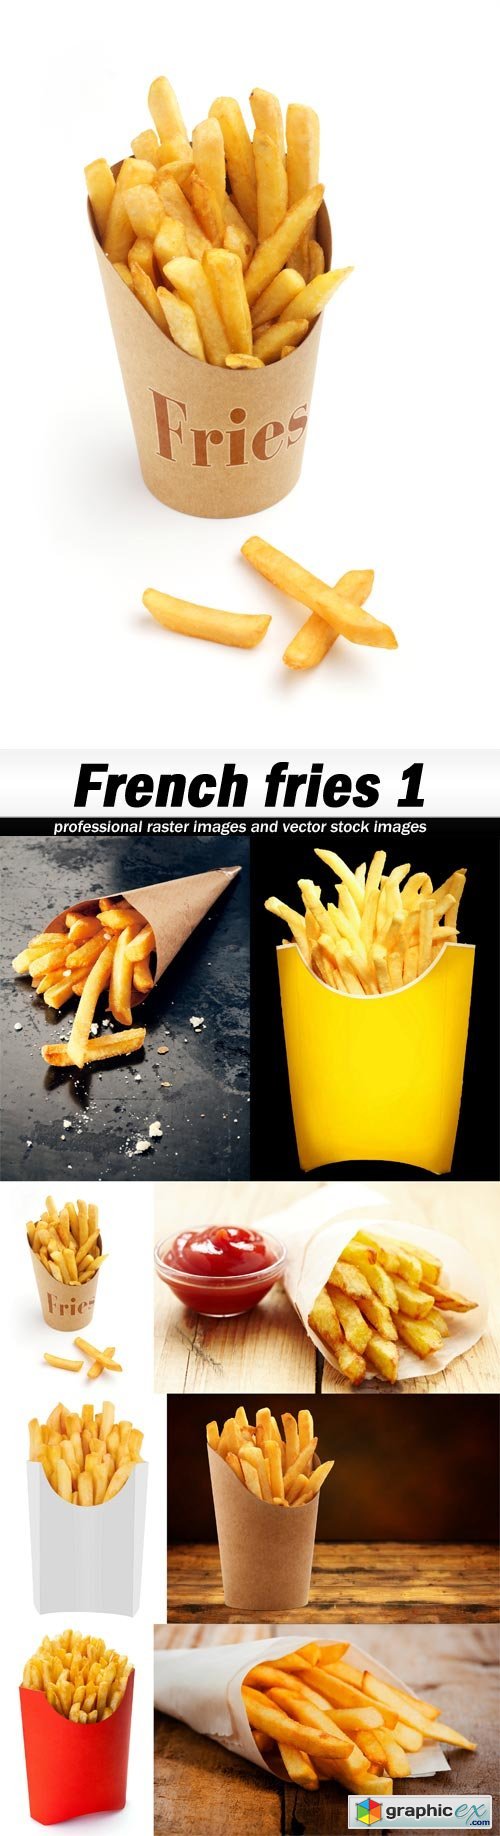 French fries 1